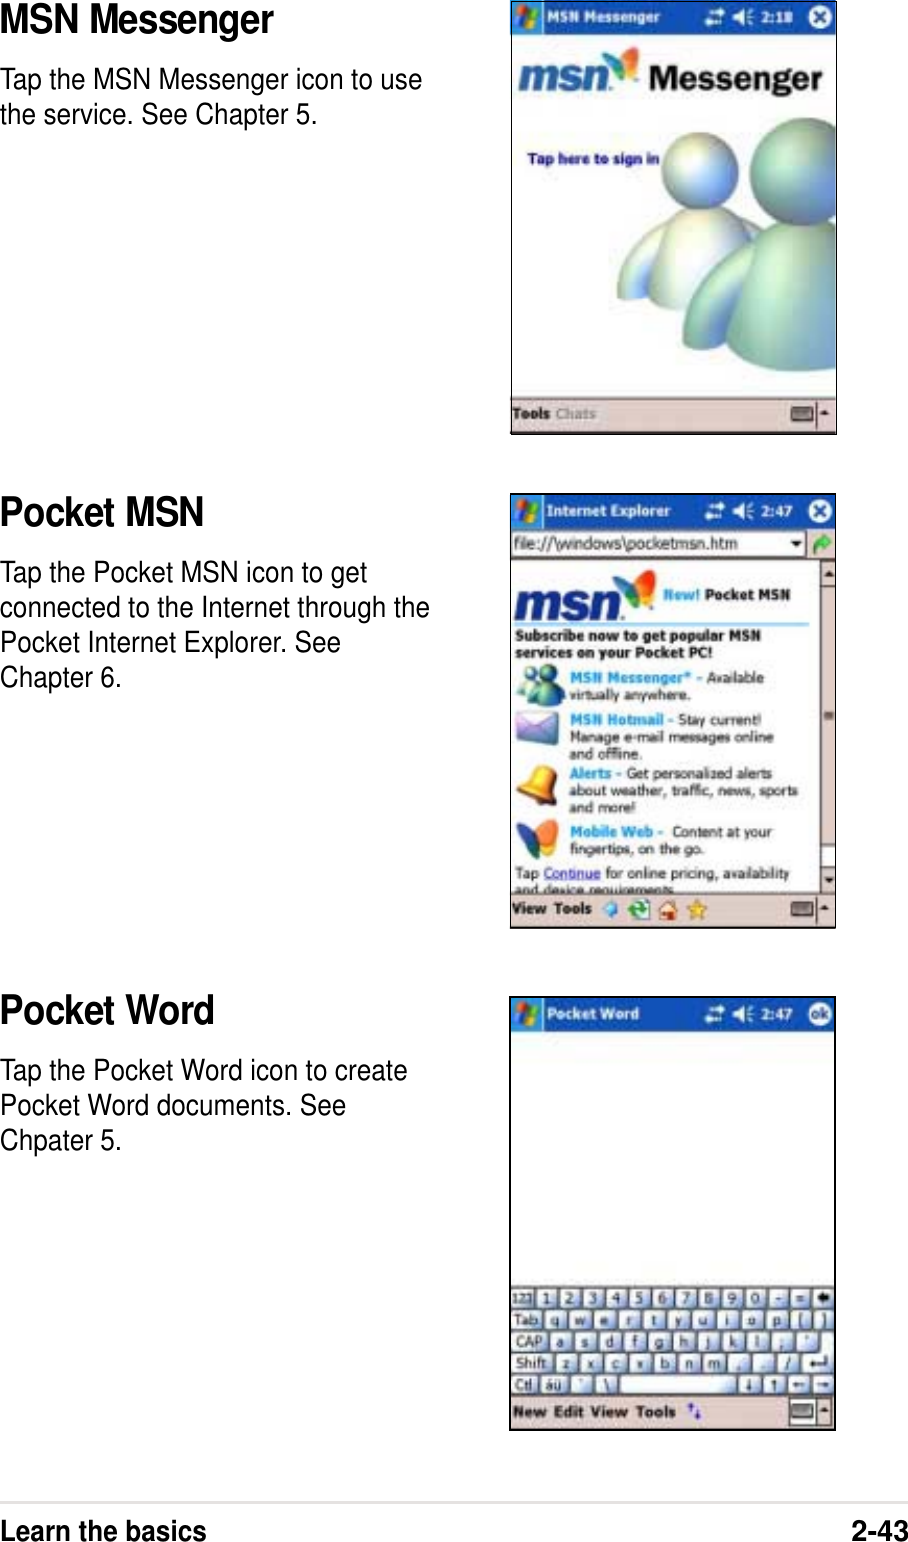 Learn the basics2-43MSN MessengerTap the MSN Messenger icon to usethe service. See Chapter 5.Pocket MSNTap the Pocket MSN icon to getconnected to the Internet through thePocket Internet Explorer. SeeChapter 6.Pocket WordTap the Pocket Word icon to createPocket Word documents. SeeChpater 5.